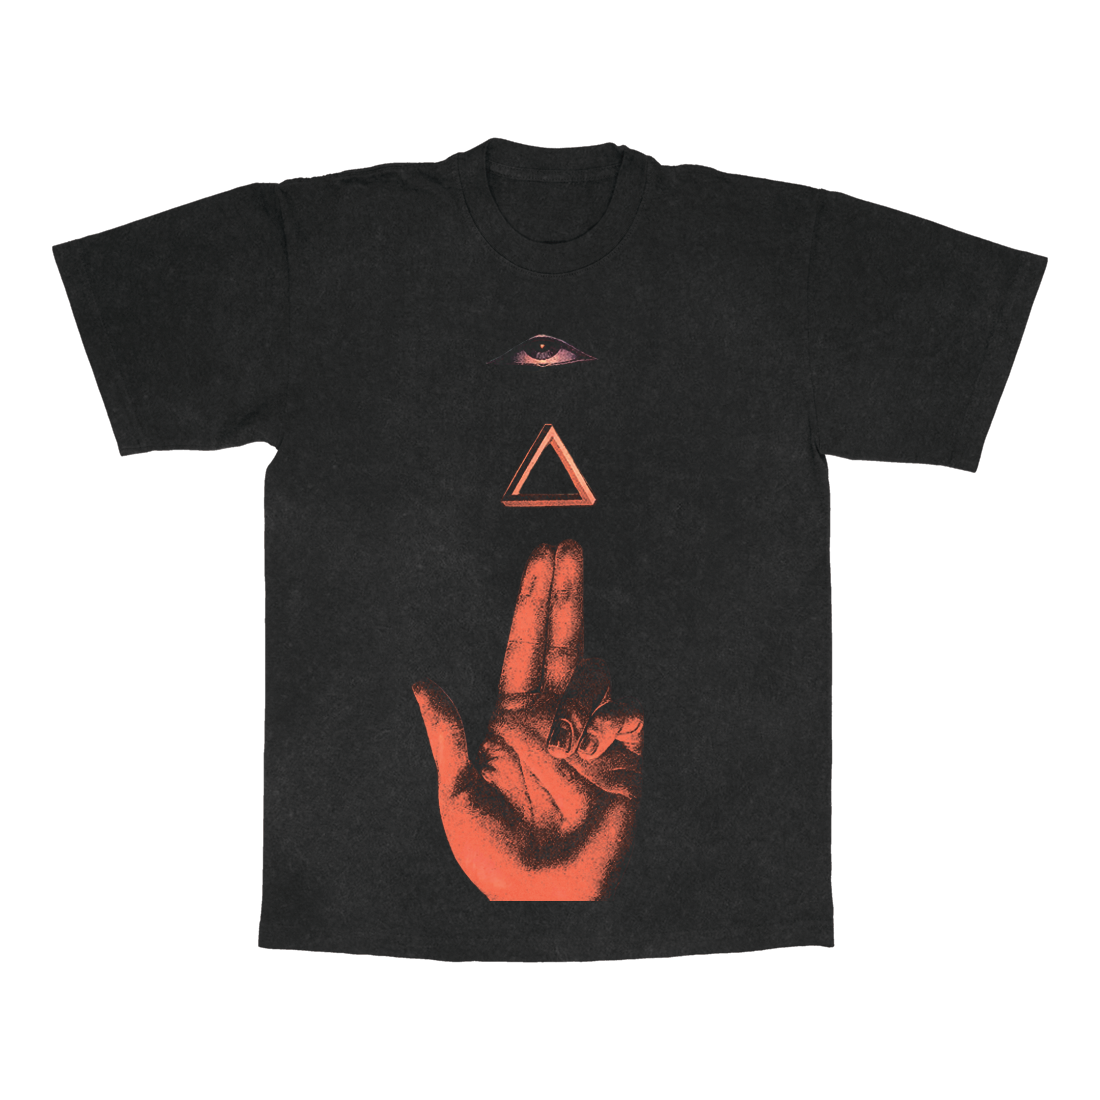 Highly Suspect - As Above, So Below Cover Tee